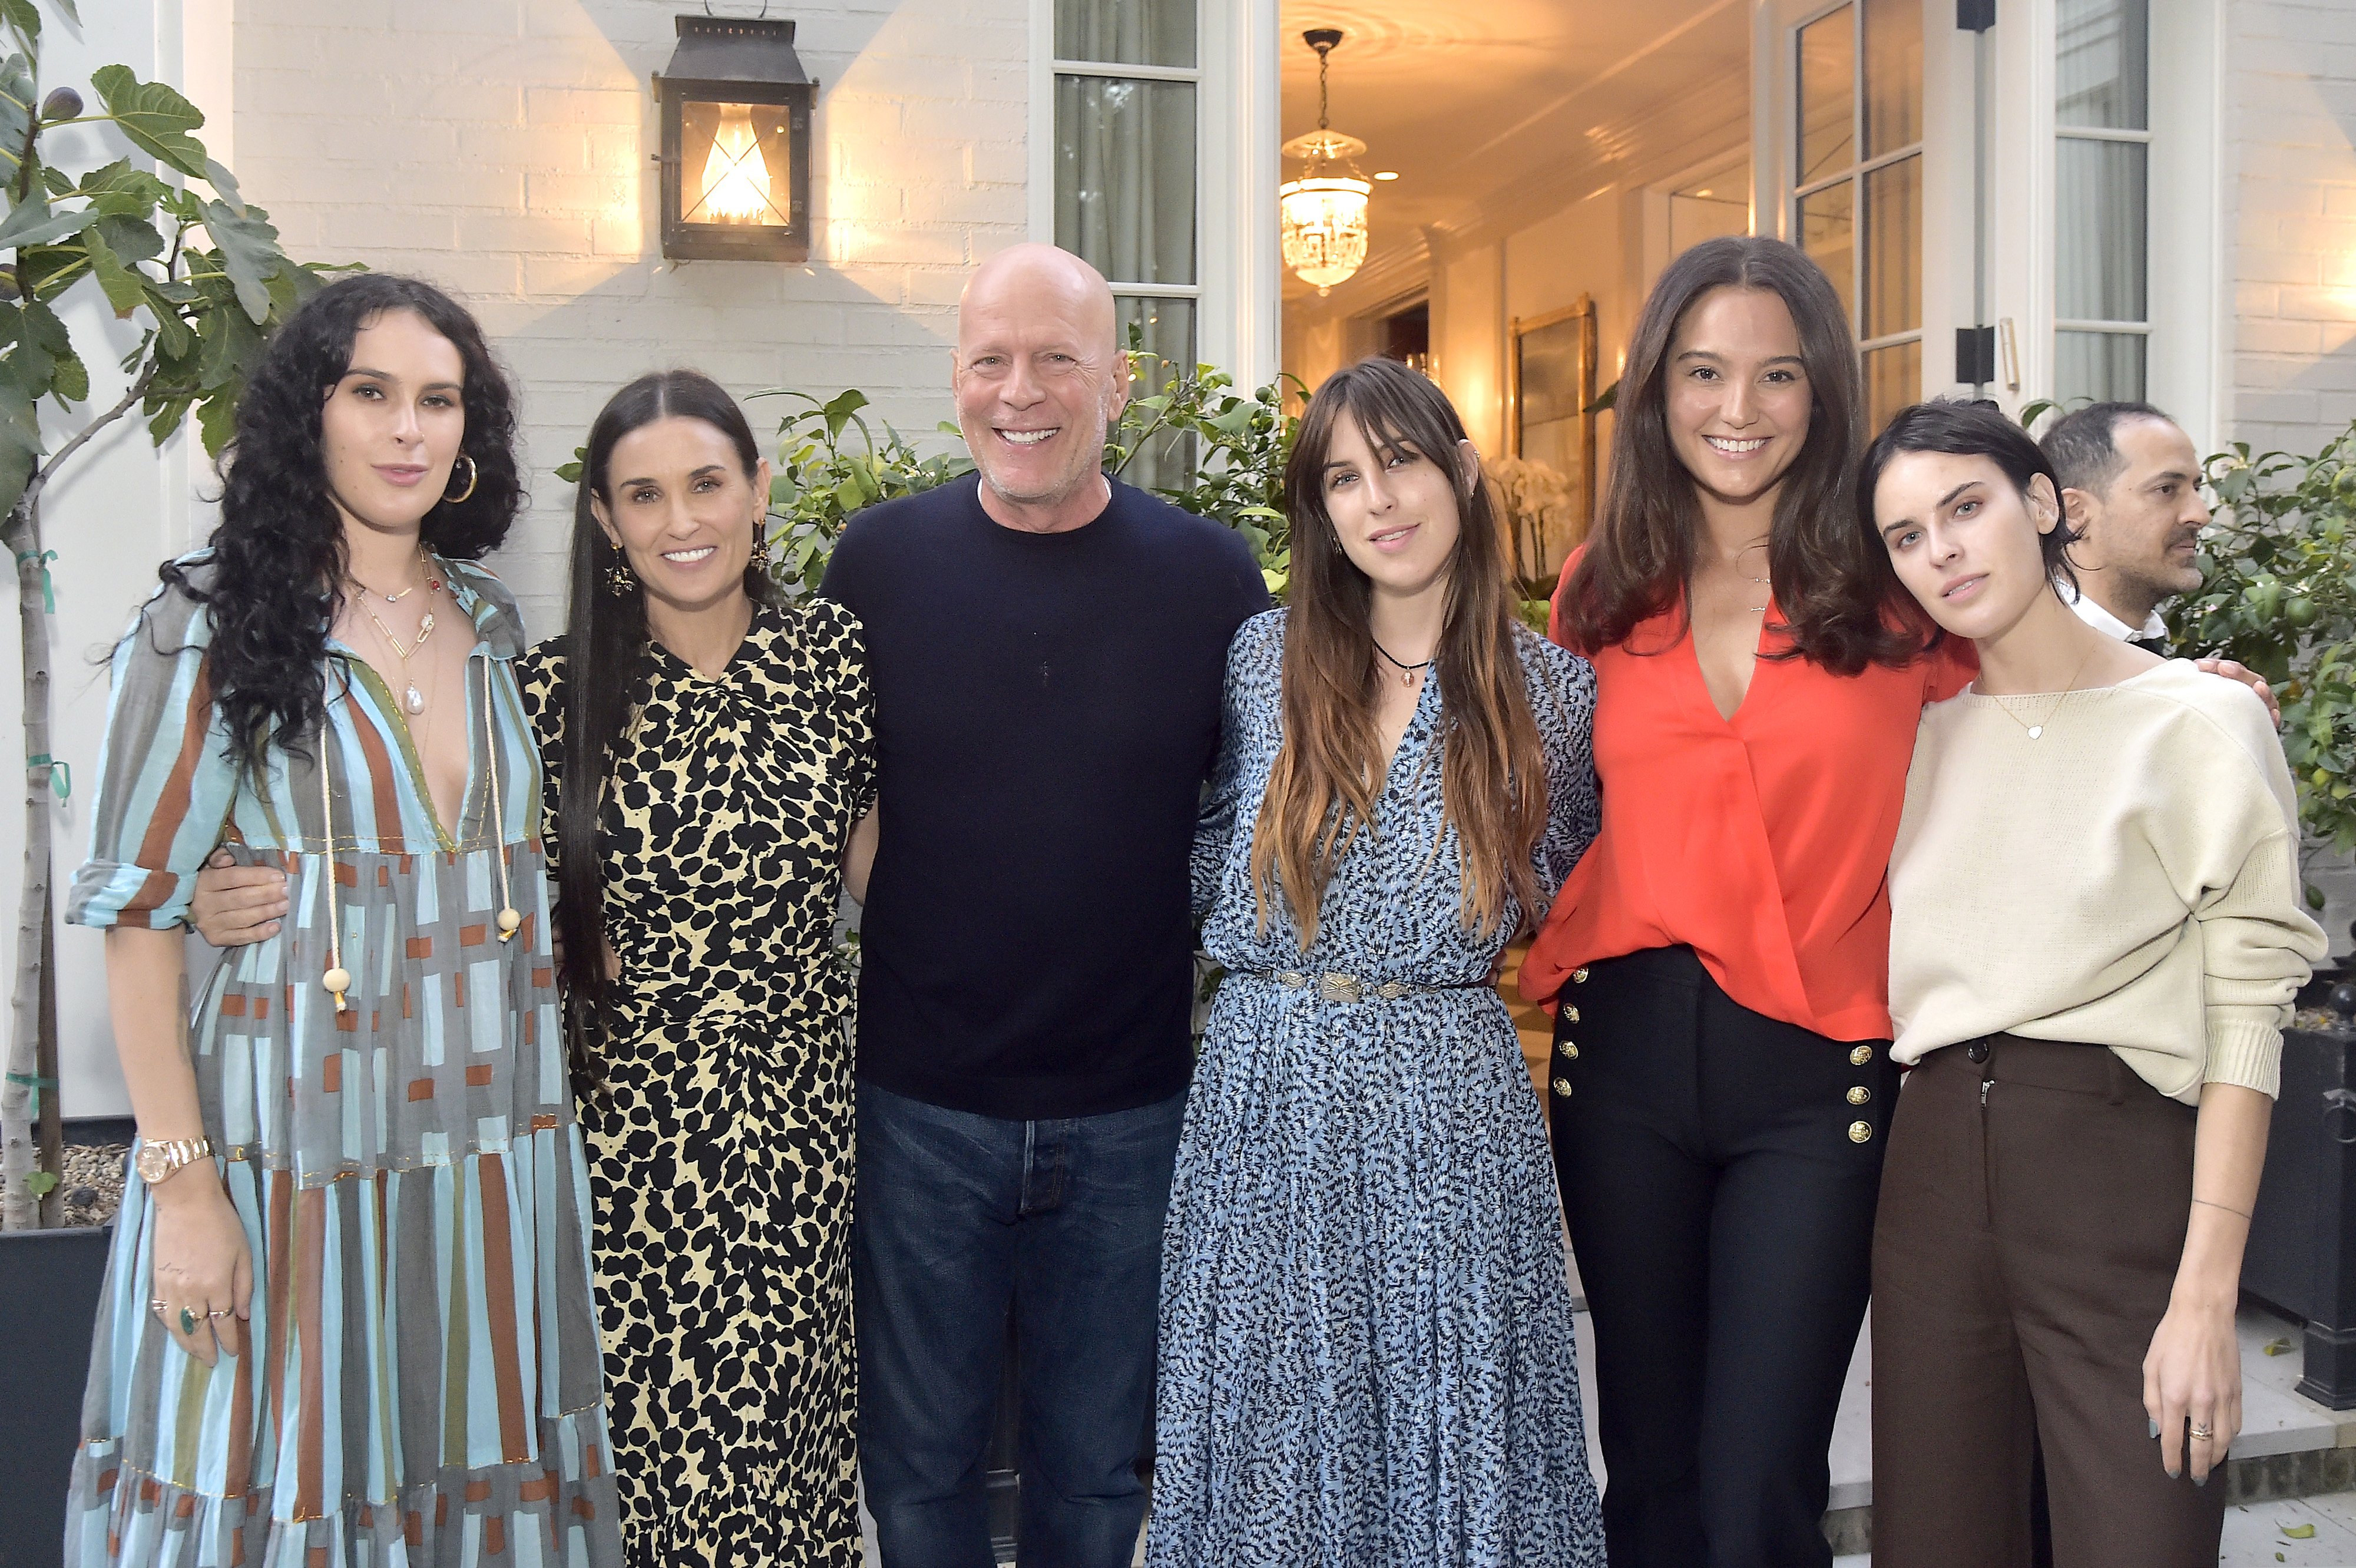 Rumer Willis, Demi Moore, Bruce Willis, Scout Willis, Emma Heming Willis and Tallulah Willis attend Demi Moore's 'Inside Out' Book Party on September 23, 2019 in Los Angeles, California | Source: Getty Images